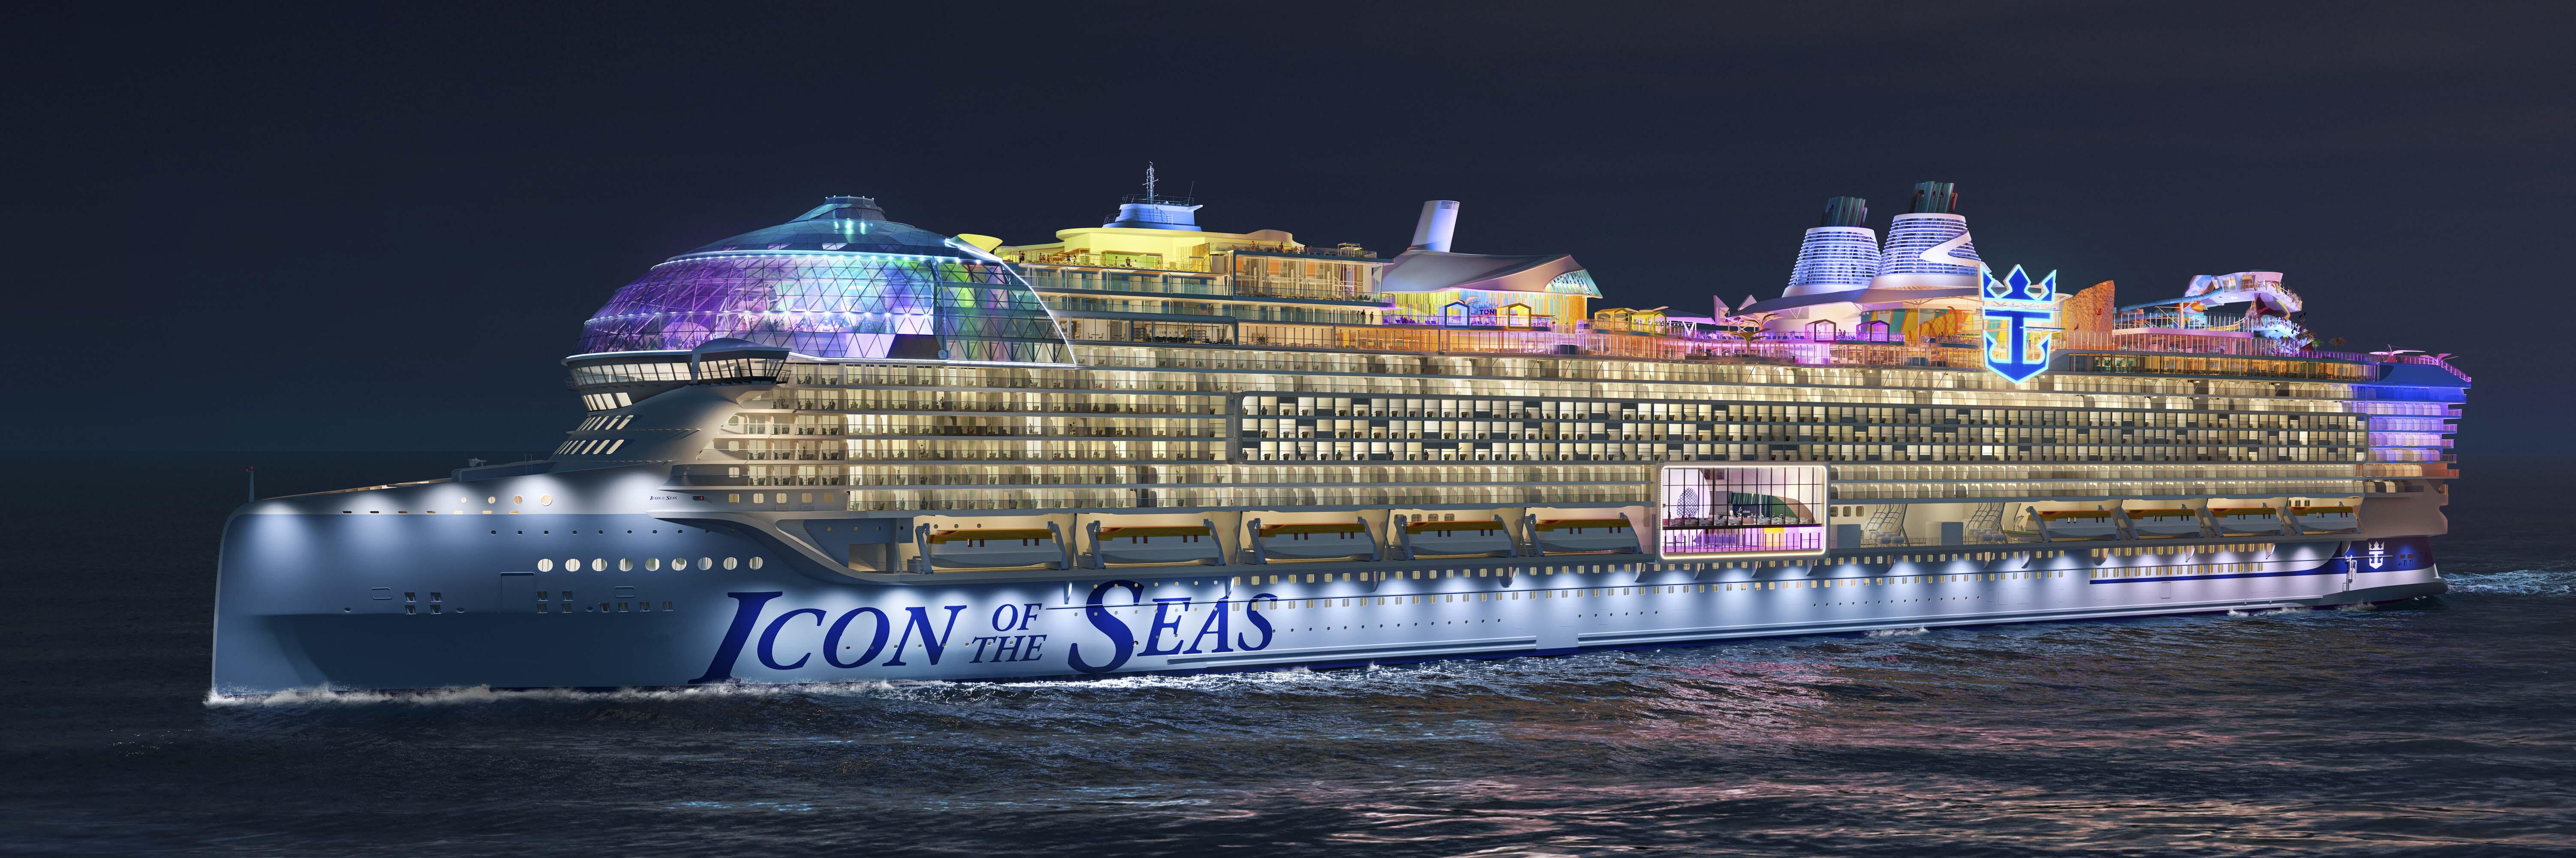 Royal Caribbean's Icon Of The Seas Is Officially The World's Biggest